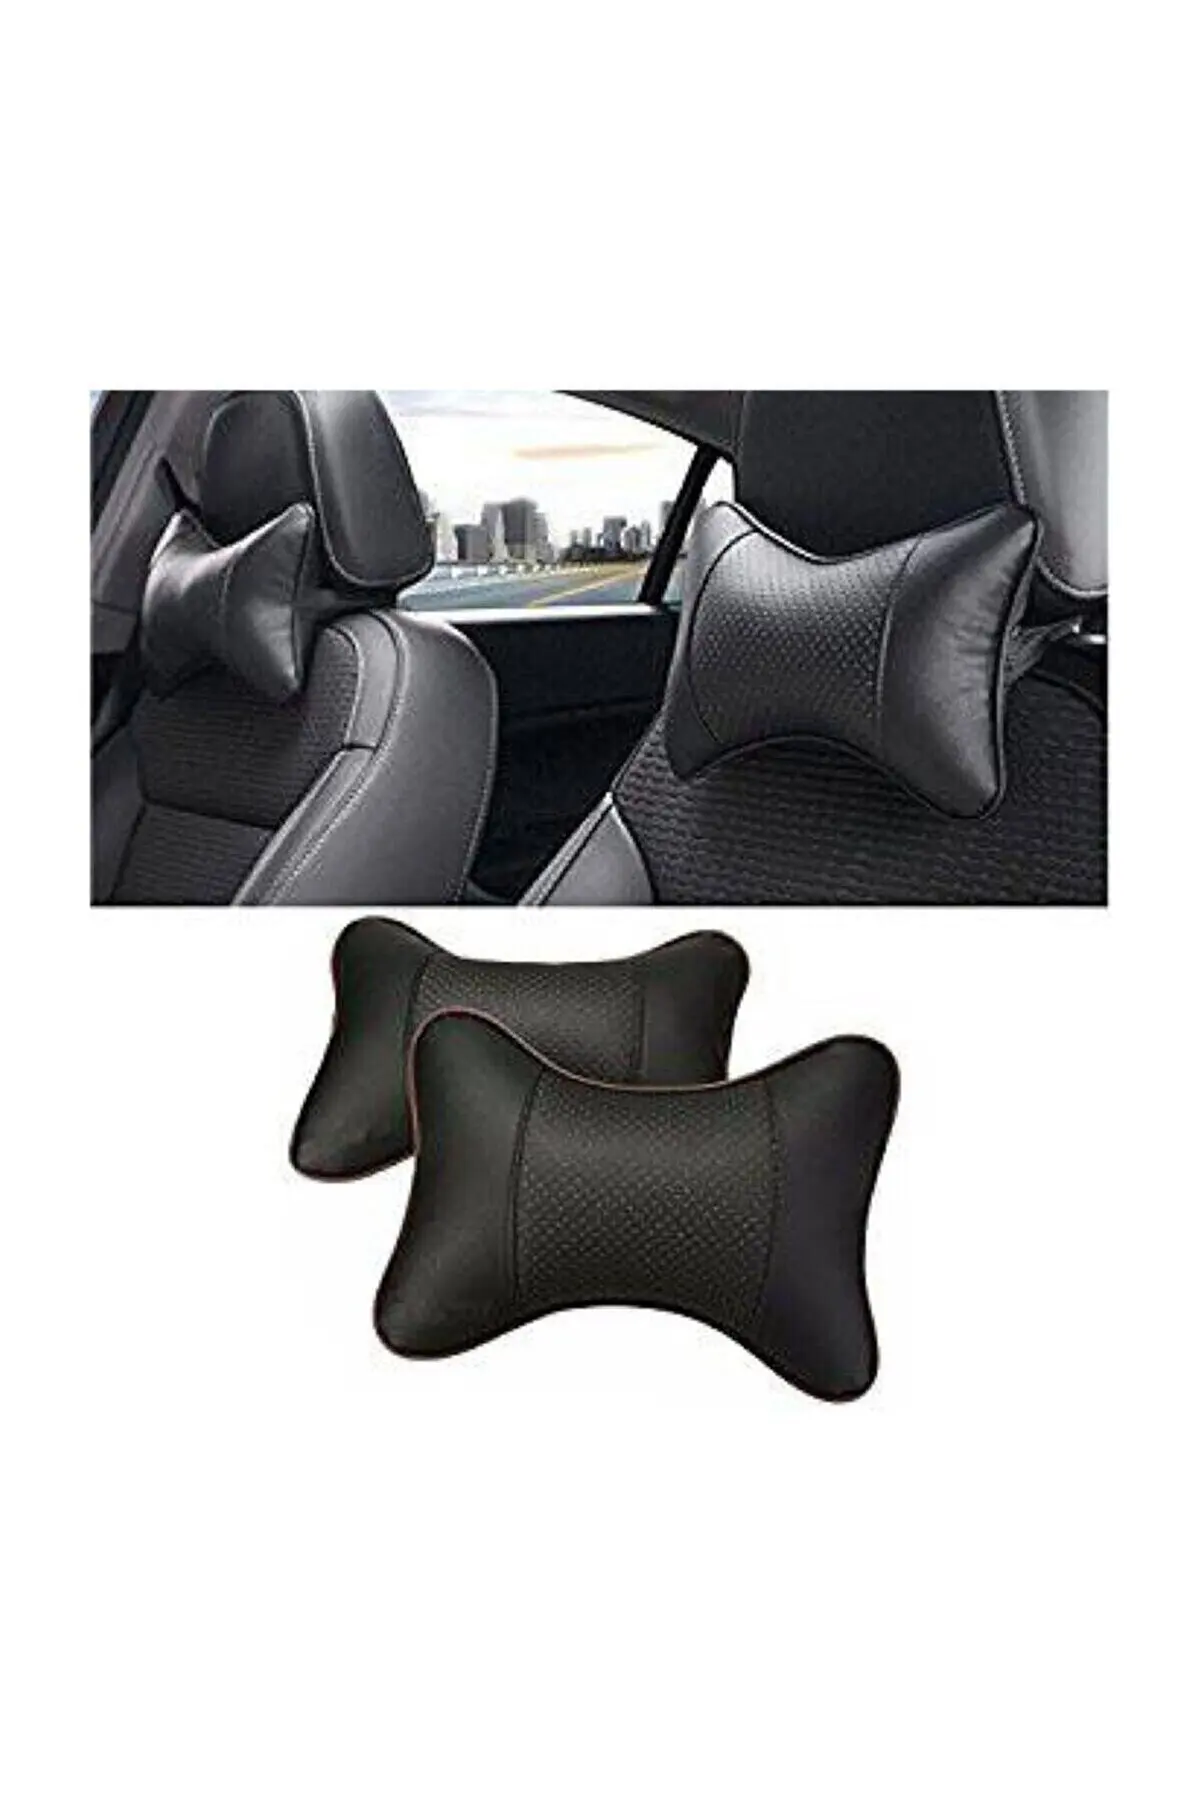 

Special Patterned 2 Li 5d Orthopedic Auto Neck Cushion (Ultra Lux) soft quality fabric relaxing comfortable beautiful design fas